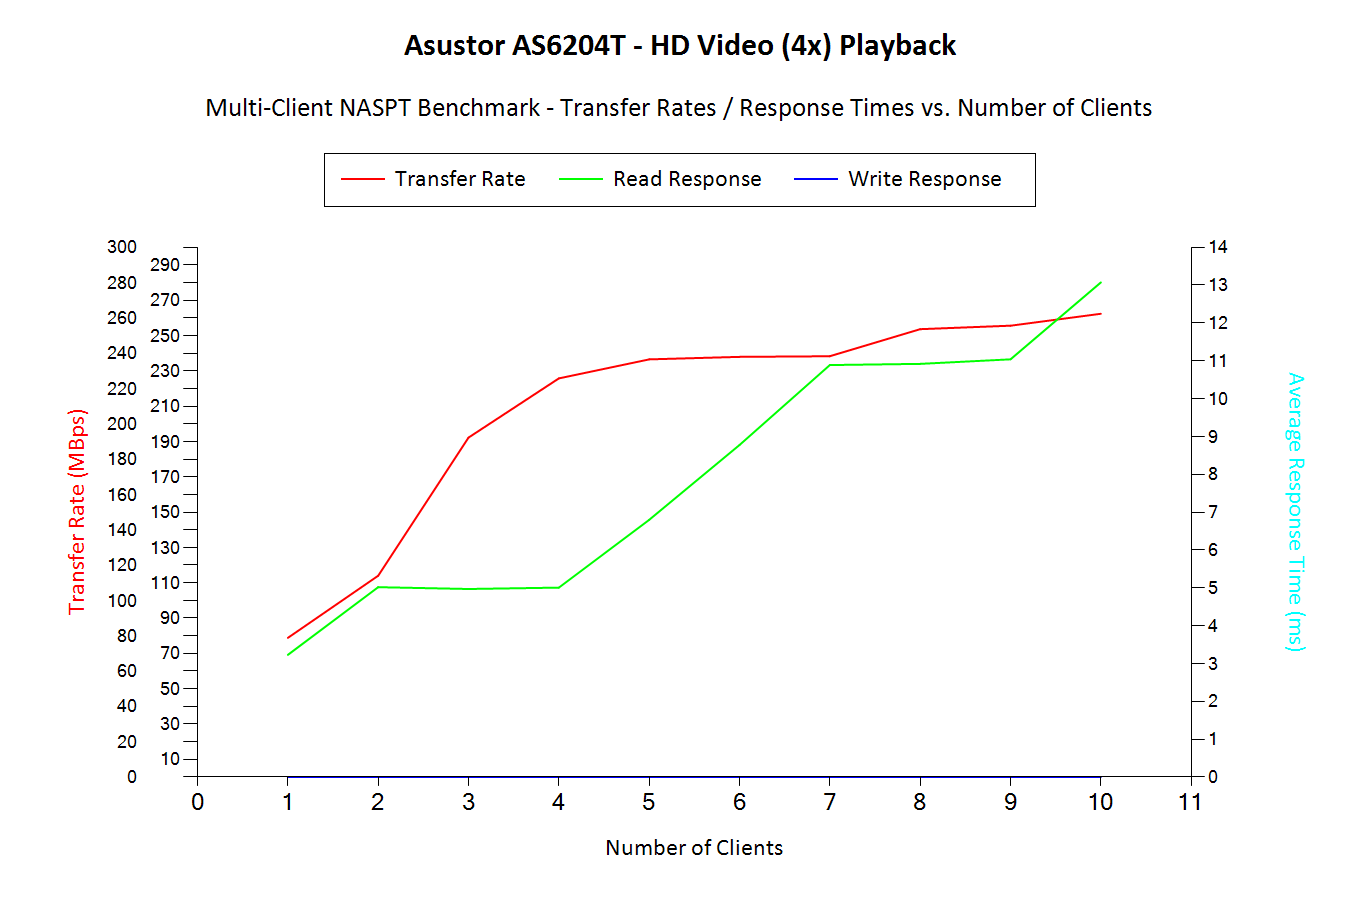 HD Video (4x) Playback - Multi-Client Benchmark